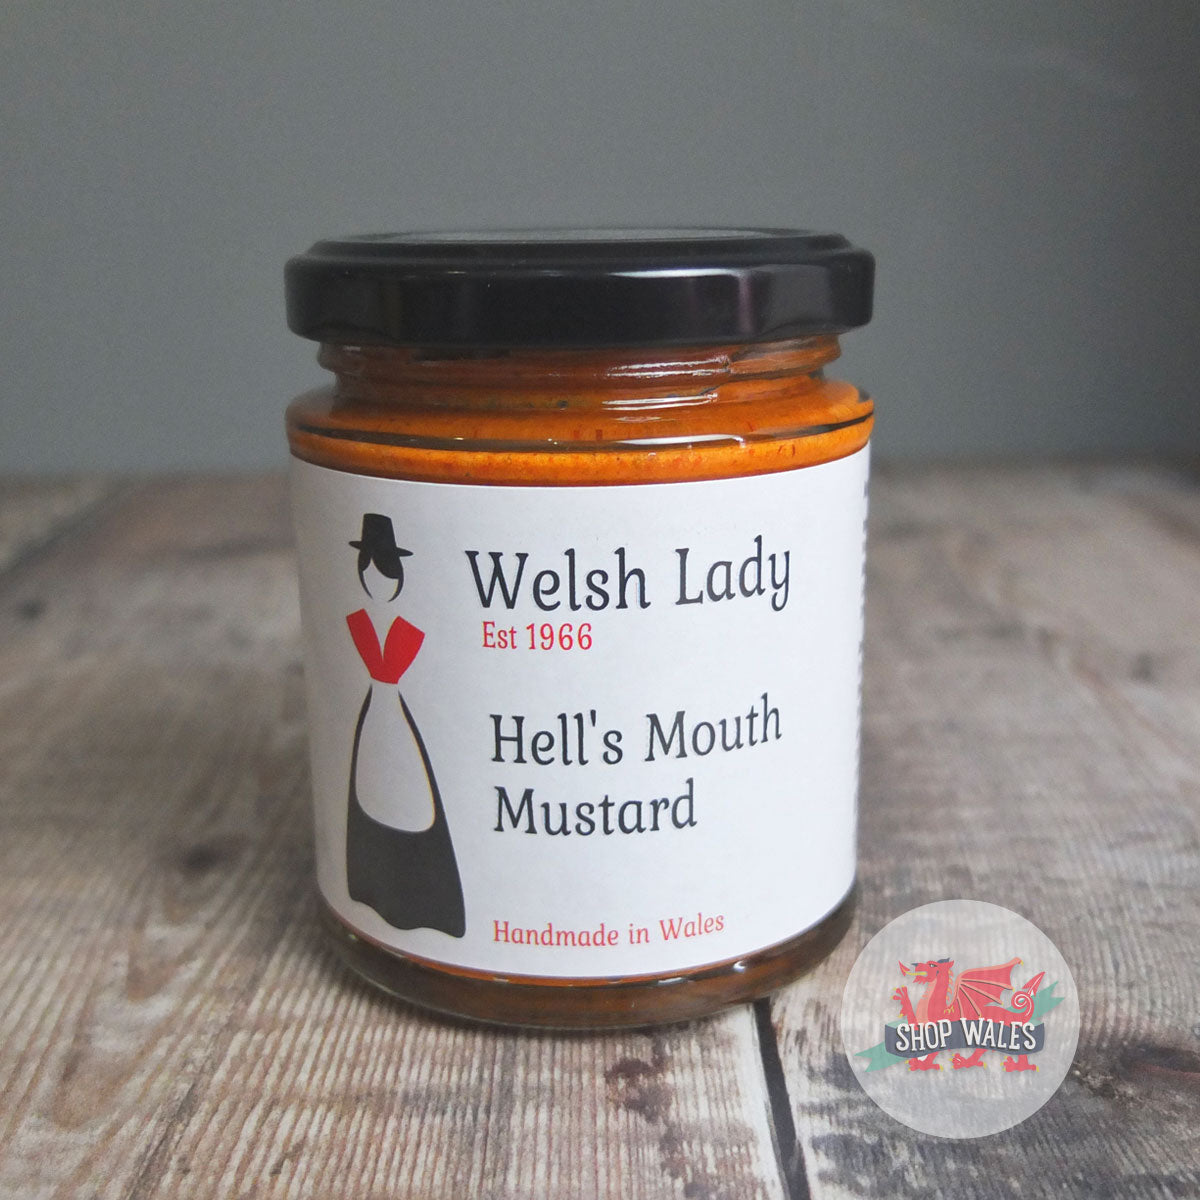 Hell's Mouth Mustard by Welsh Lady Preserves